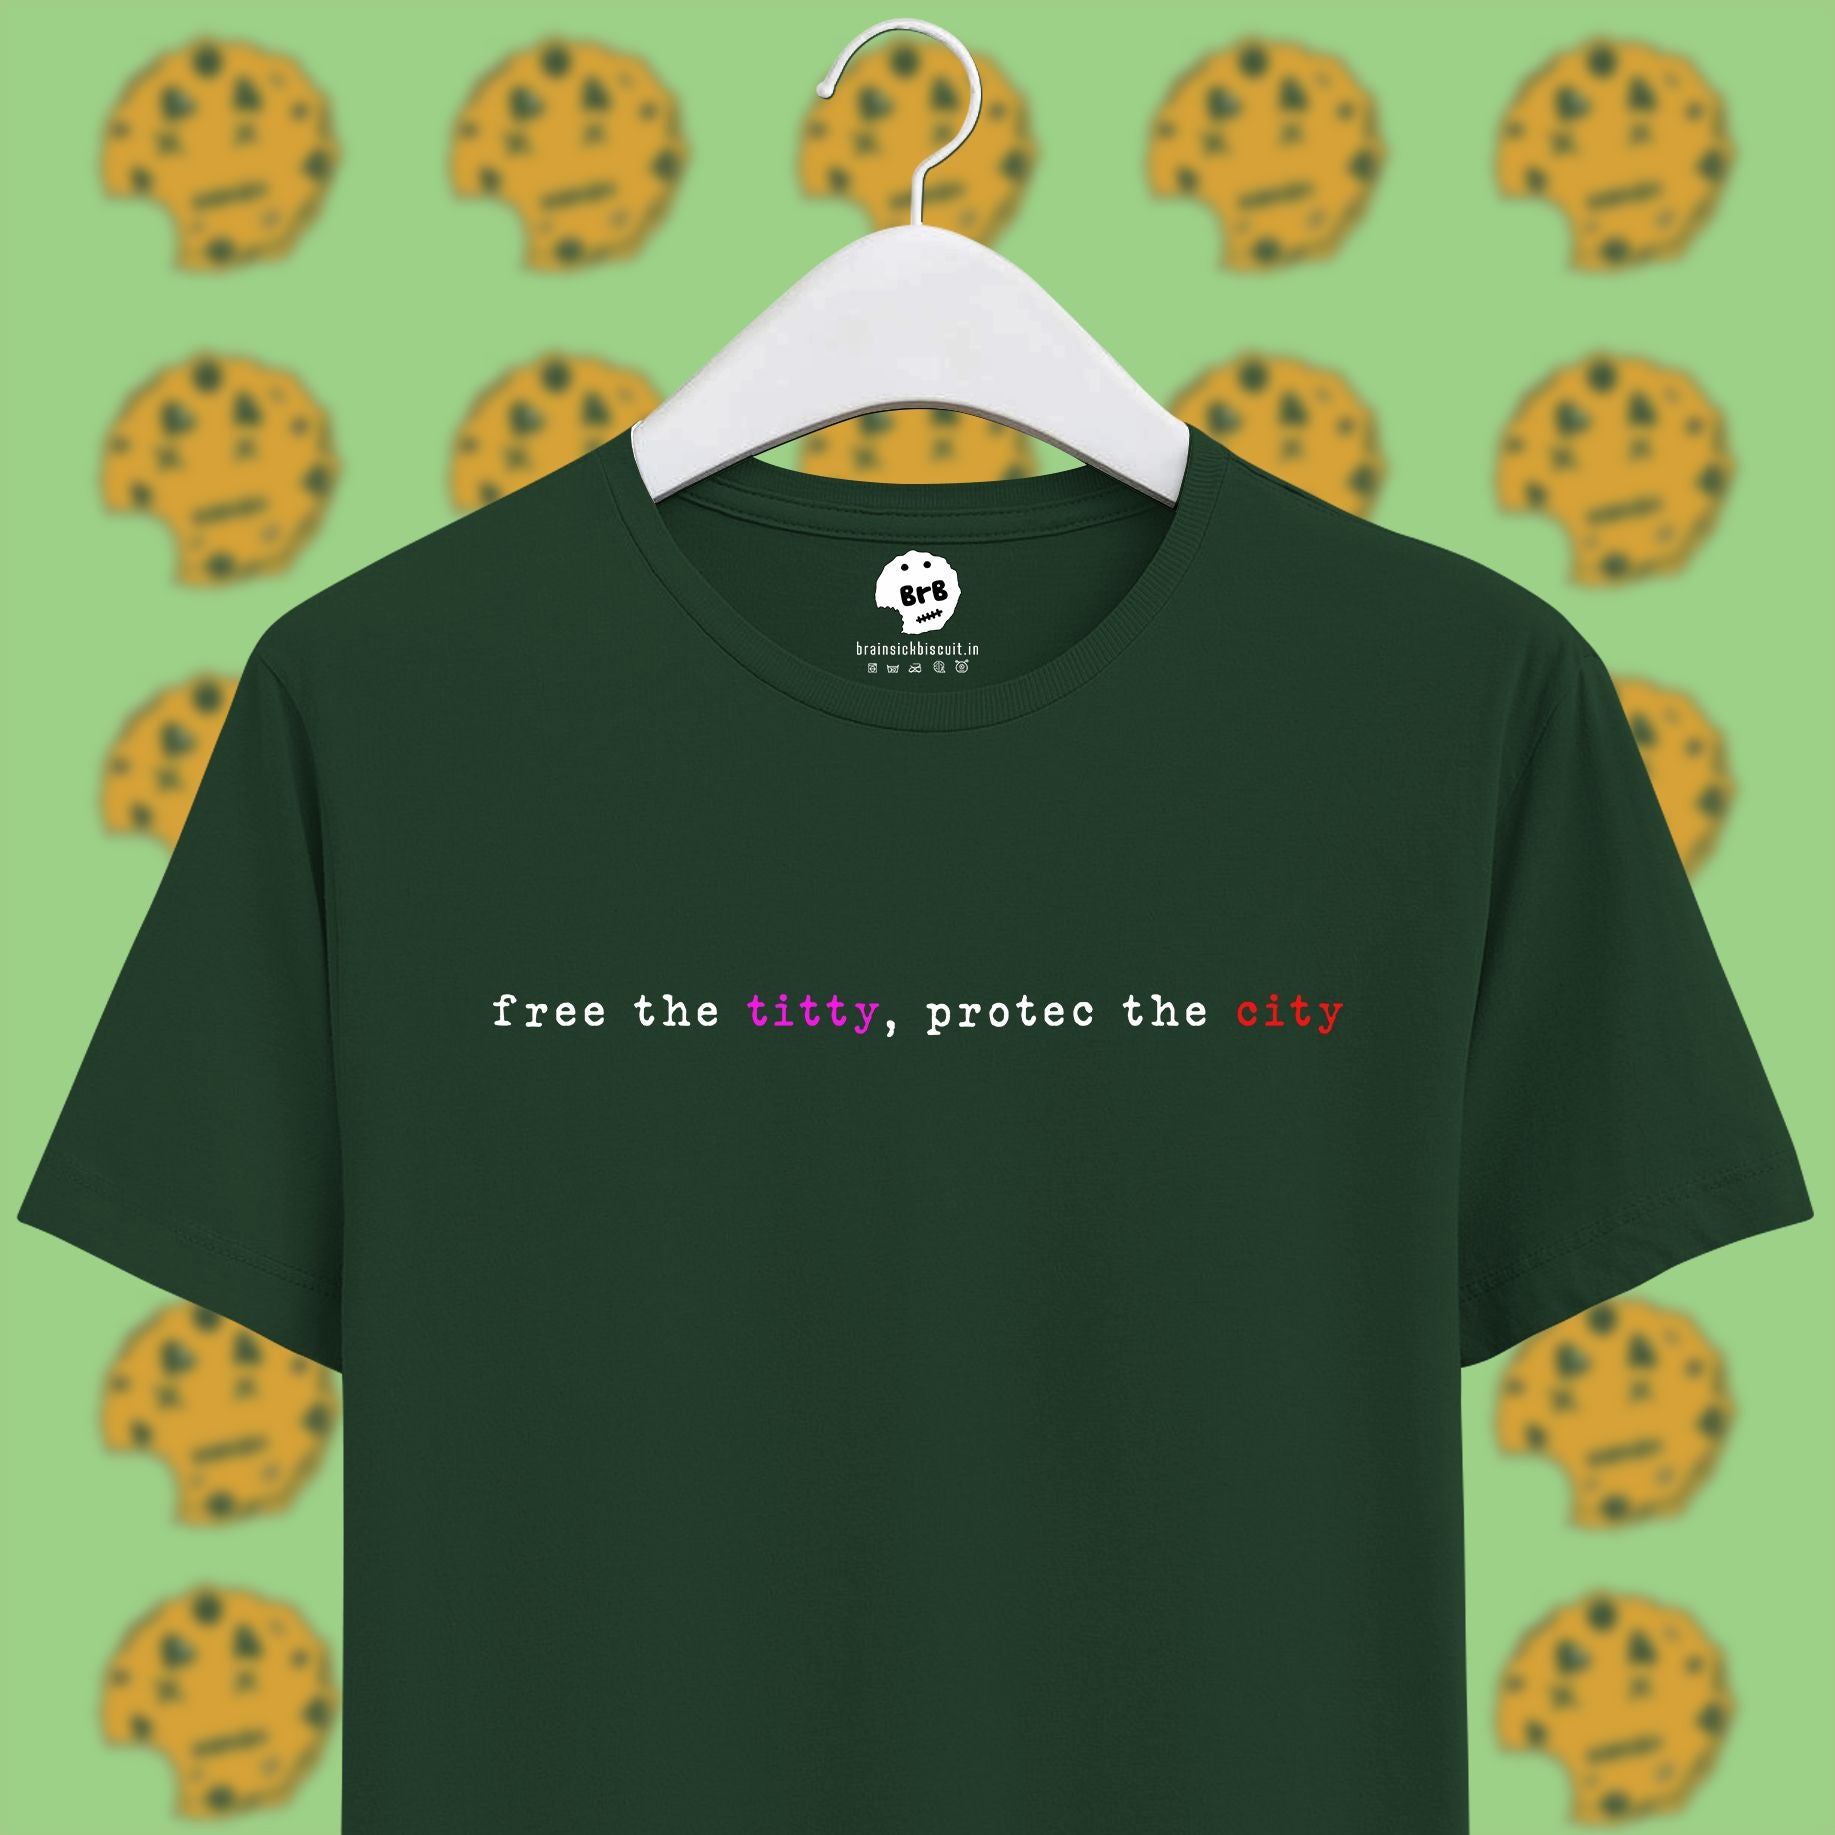 green unisex half sleeves t-shirt with quote free the titty, protec the city